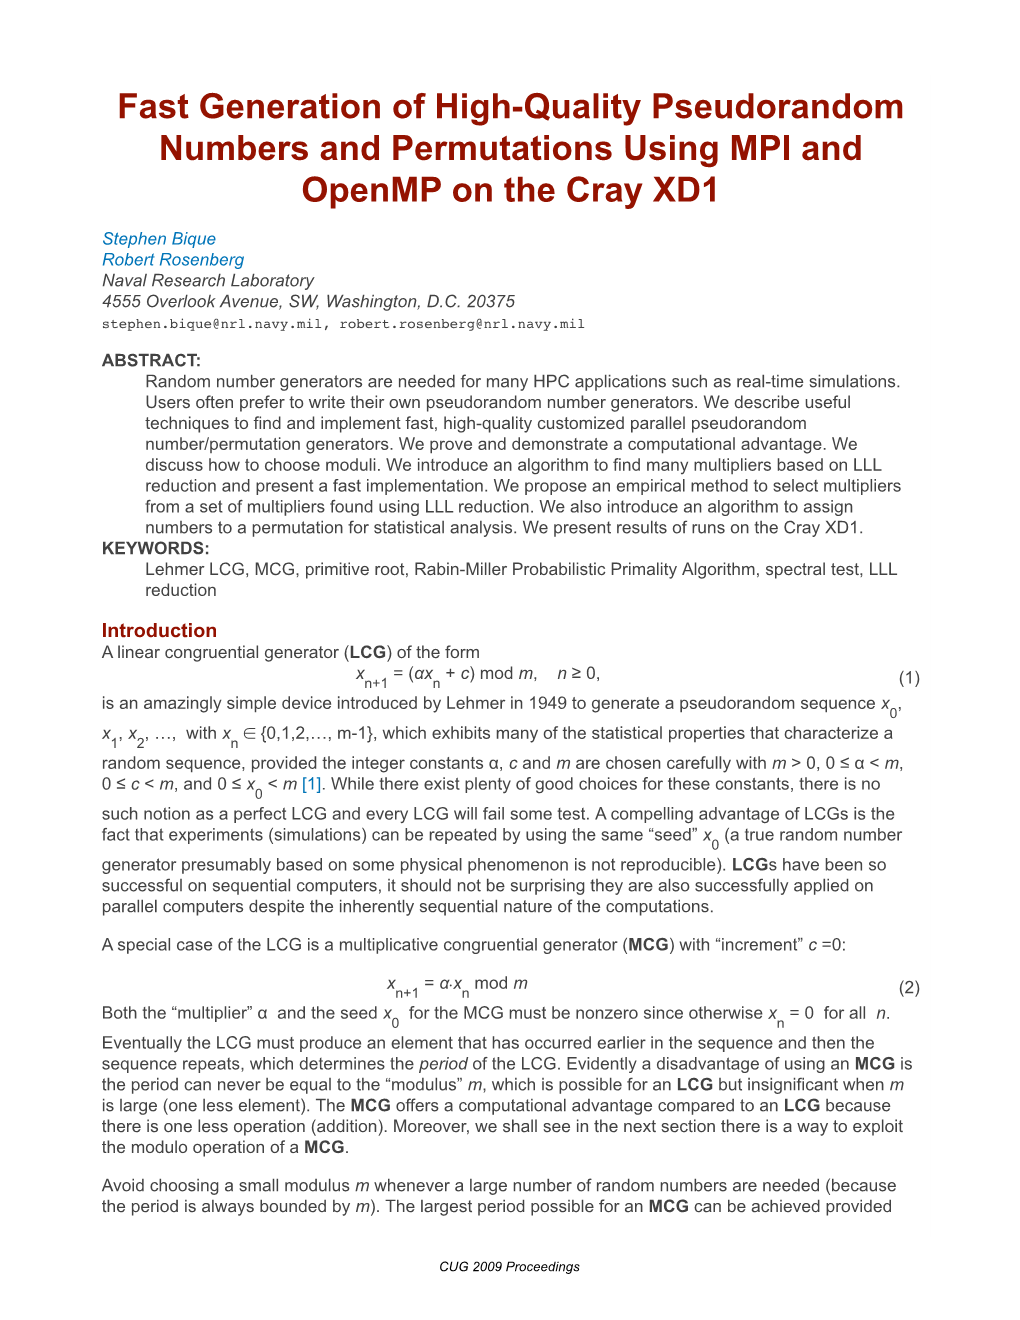 Fast Generation of High-Quality Pseudorandom Numbers and Permutations Using MPI and Openmp on the Cray XD1